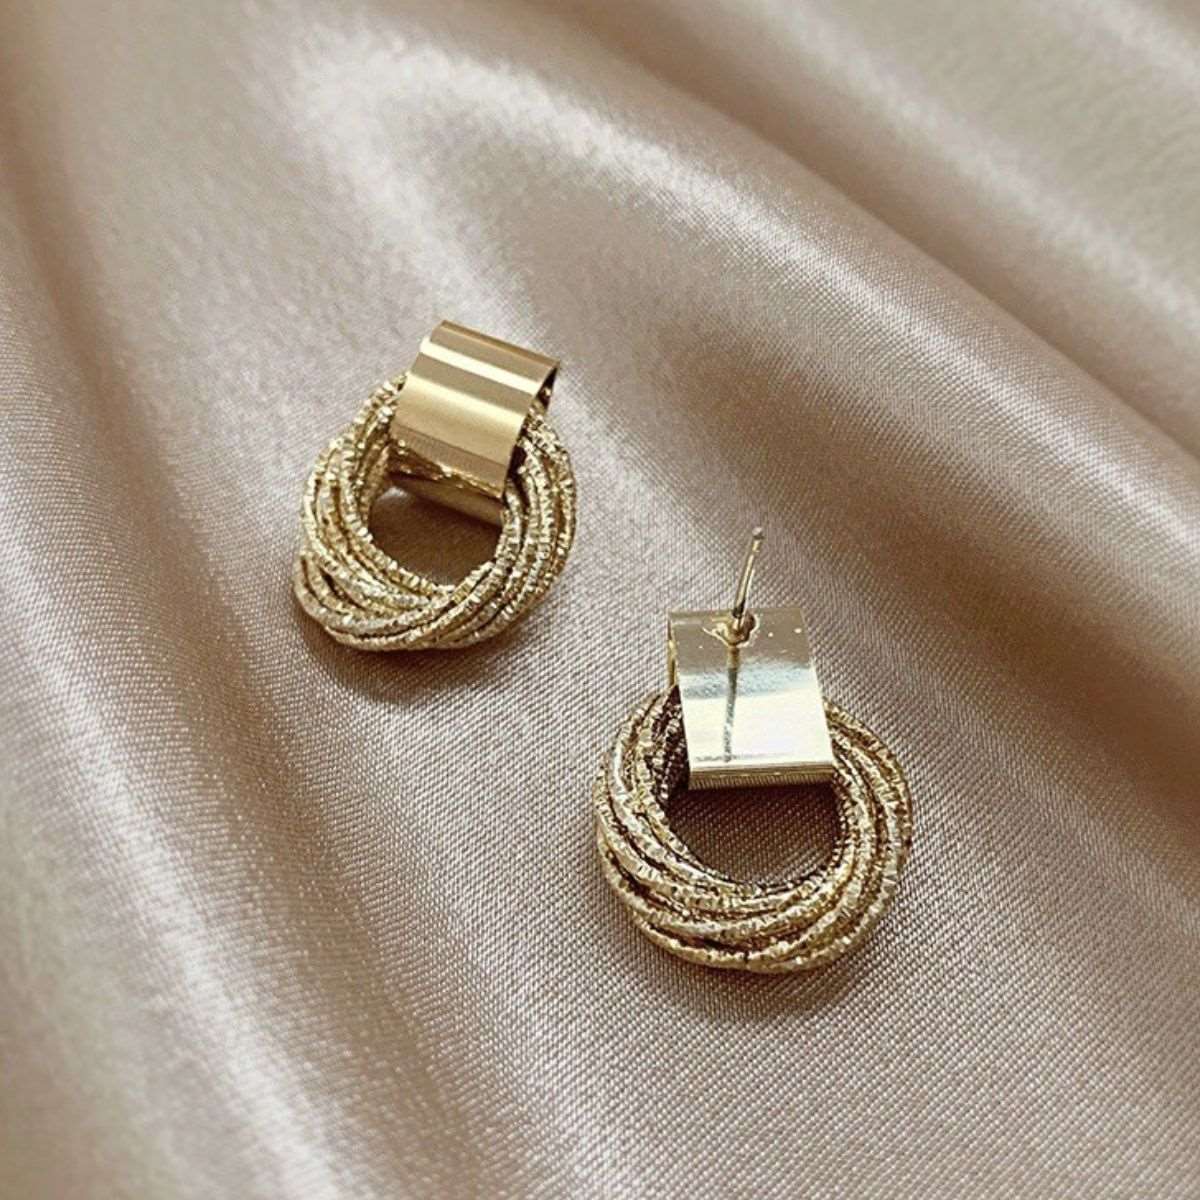 Alloy Gold-Plated Drop Earrings apparel & accessories